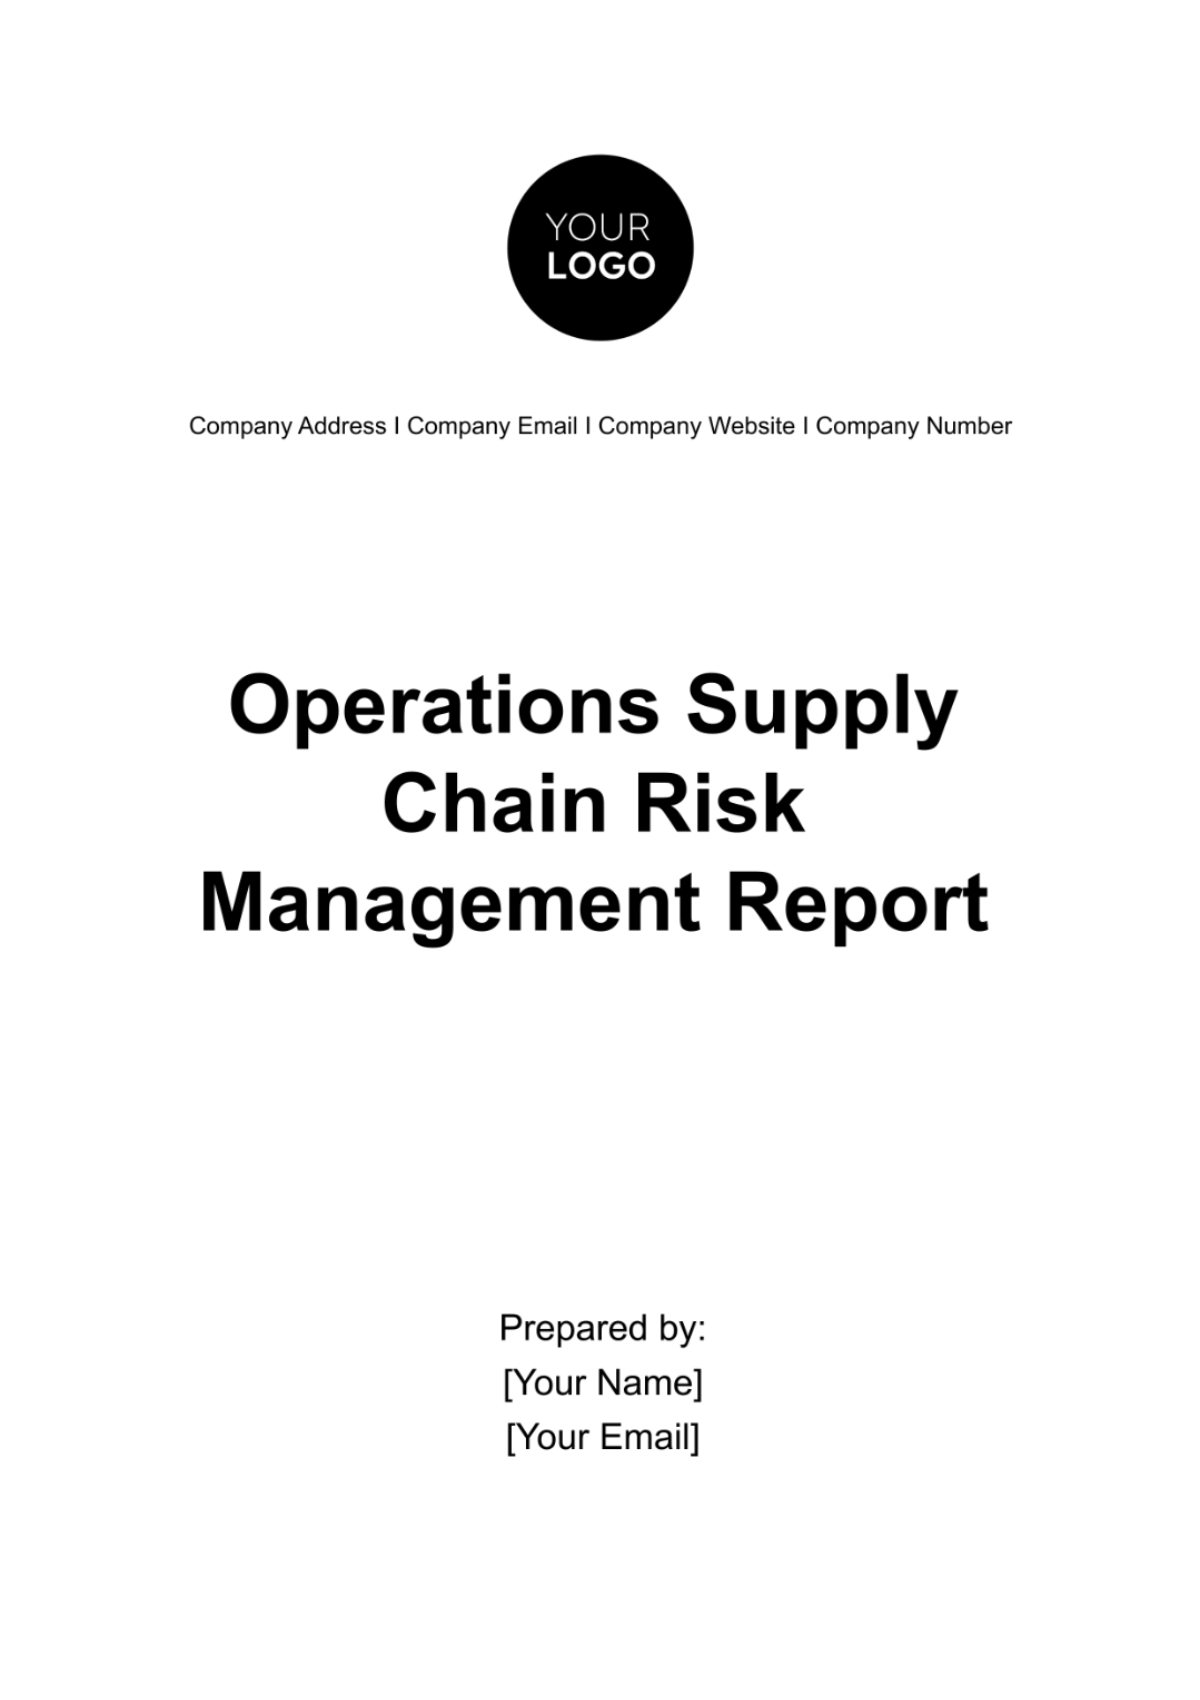 Operations Supply Chain Risk Management Report Template